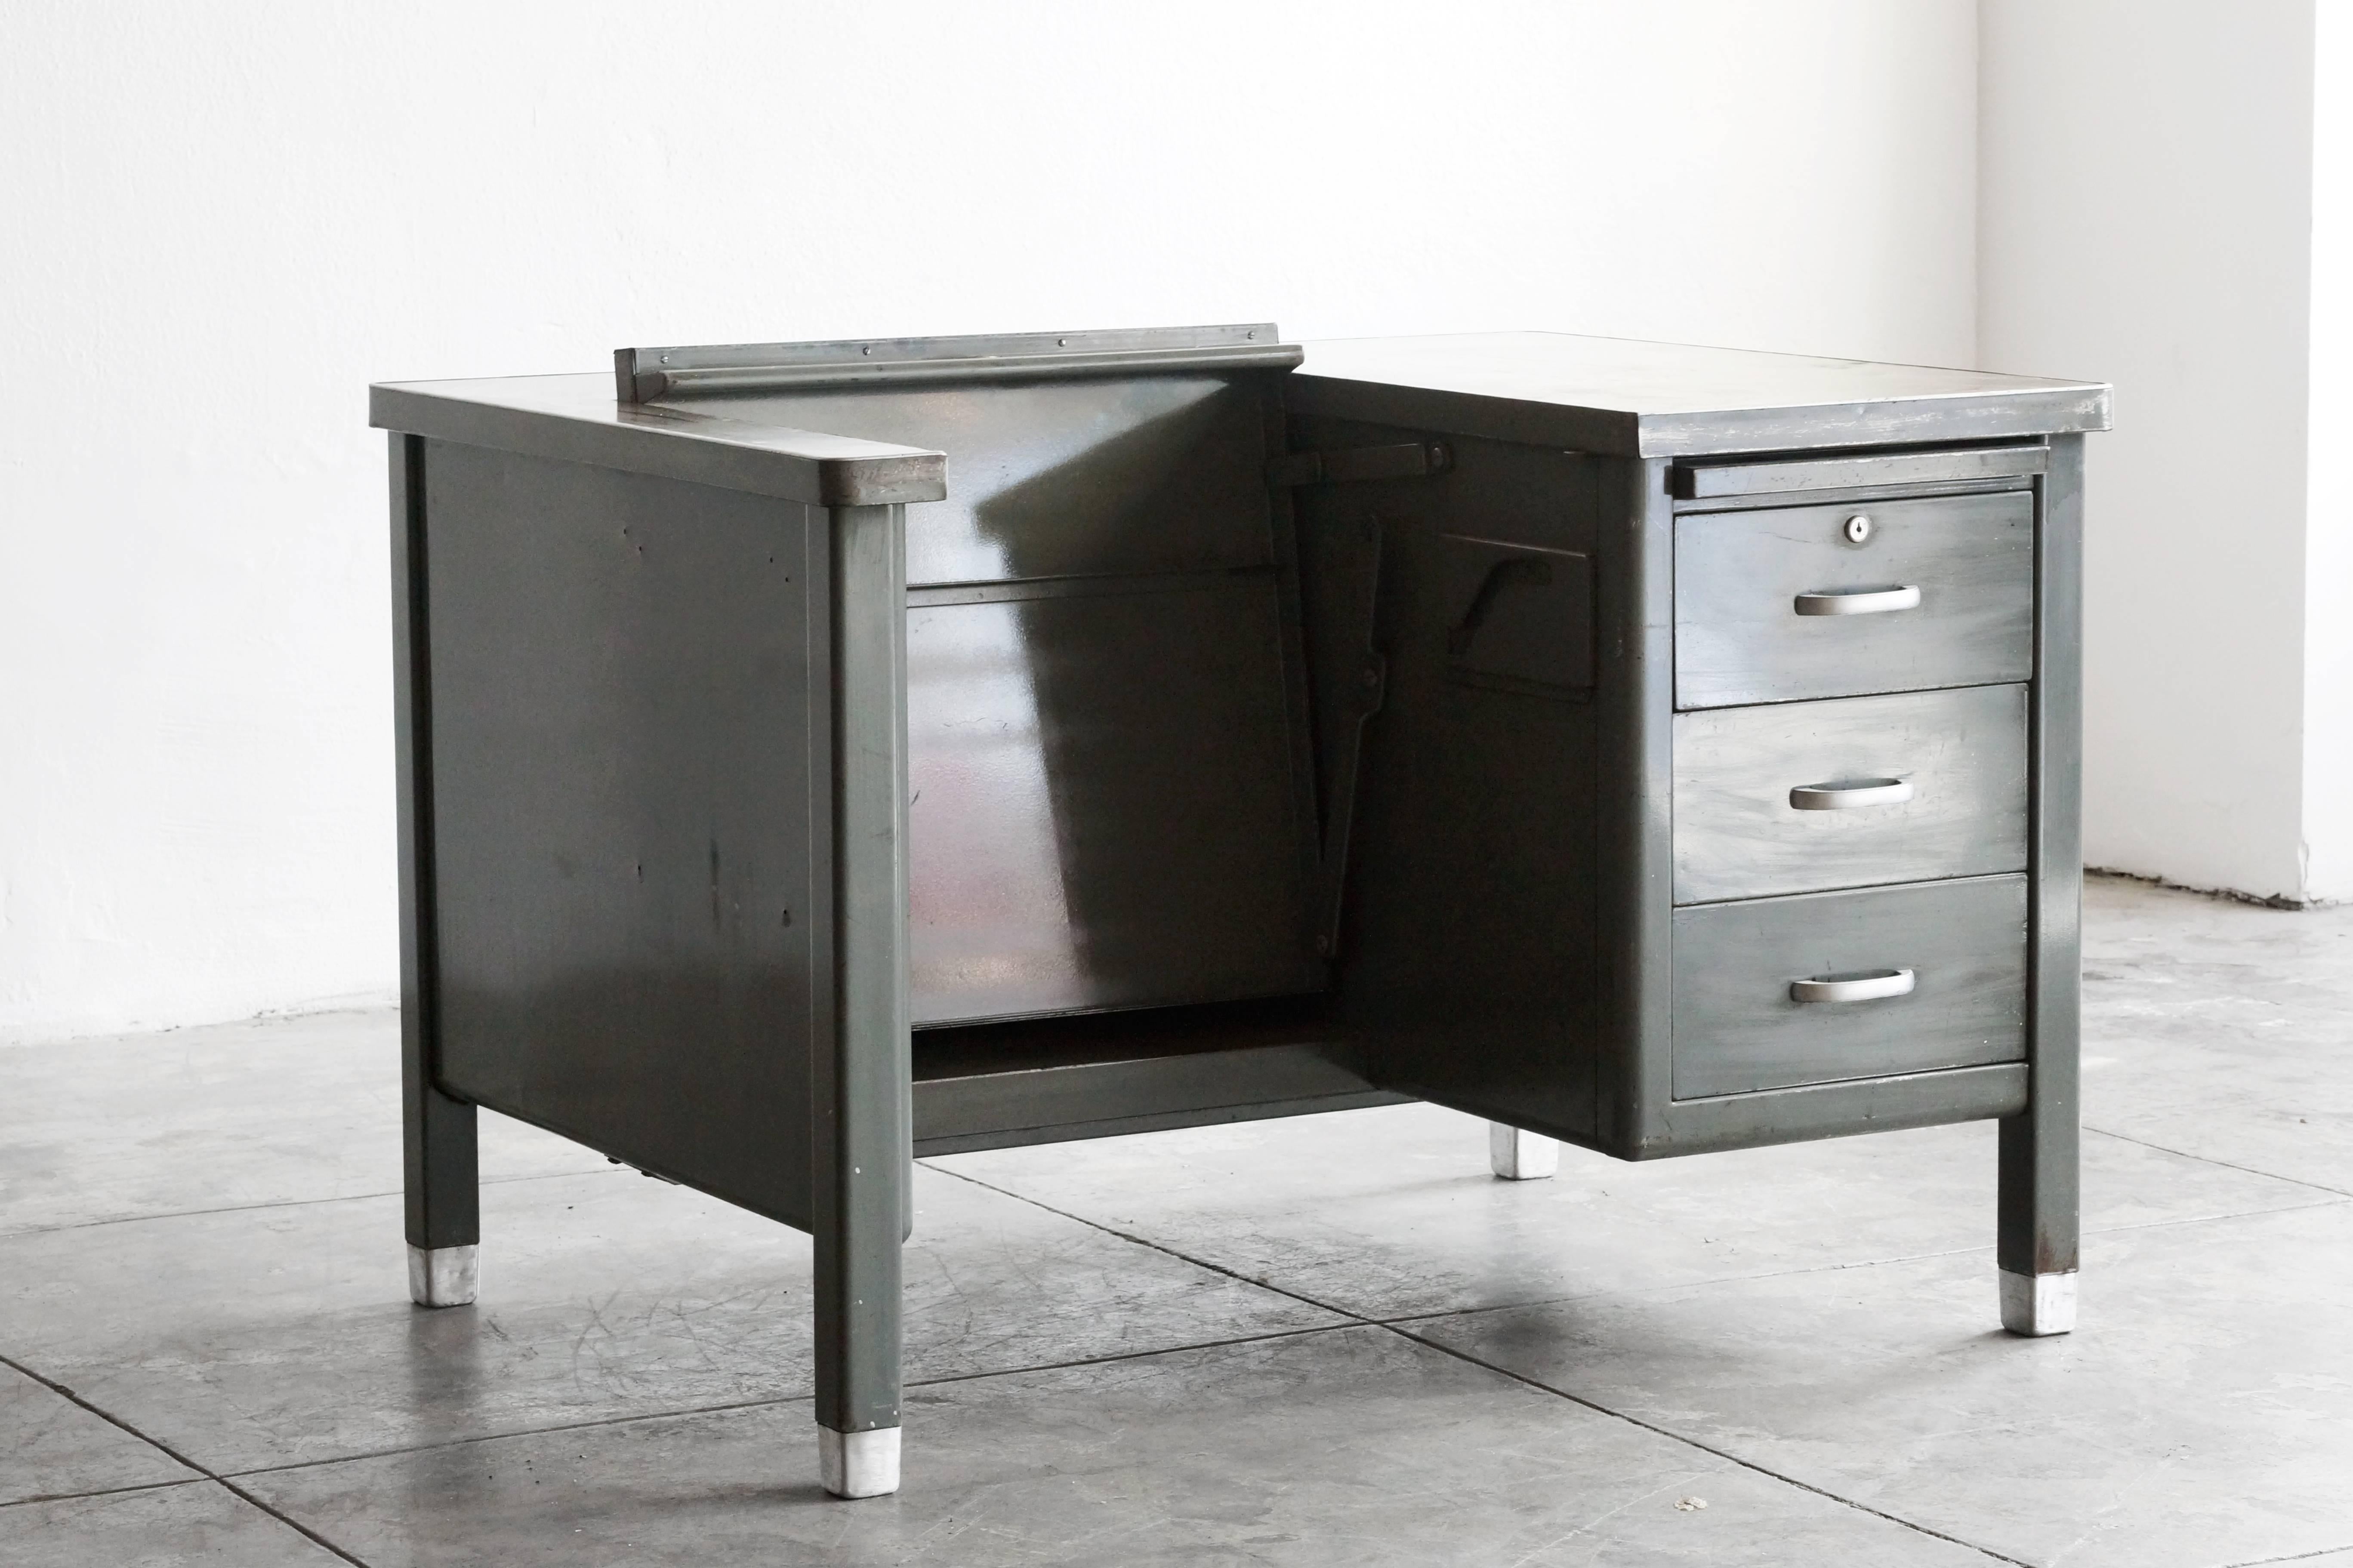 1920s single pedestal specialty tanker desk constructed to store a typewriter. This is a great example of an early tanker desk, complete with vintage industrial patina. Notice how the middle section tucks in (however, please note that this mechanism